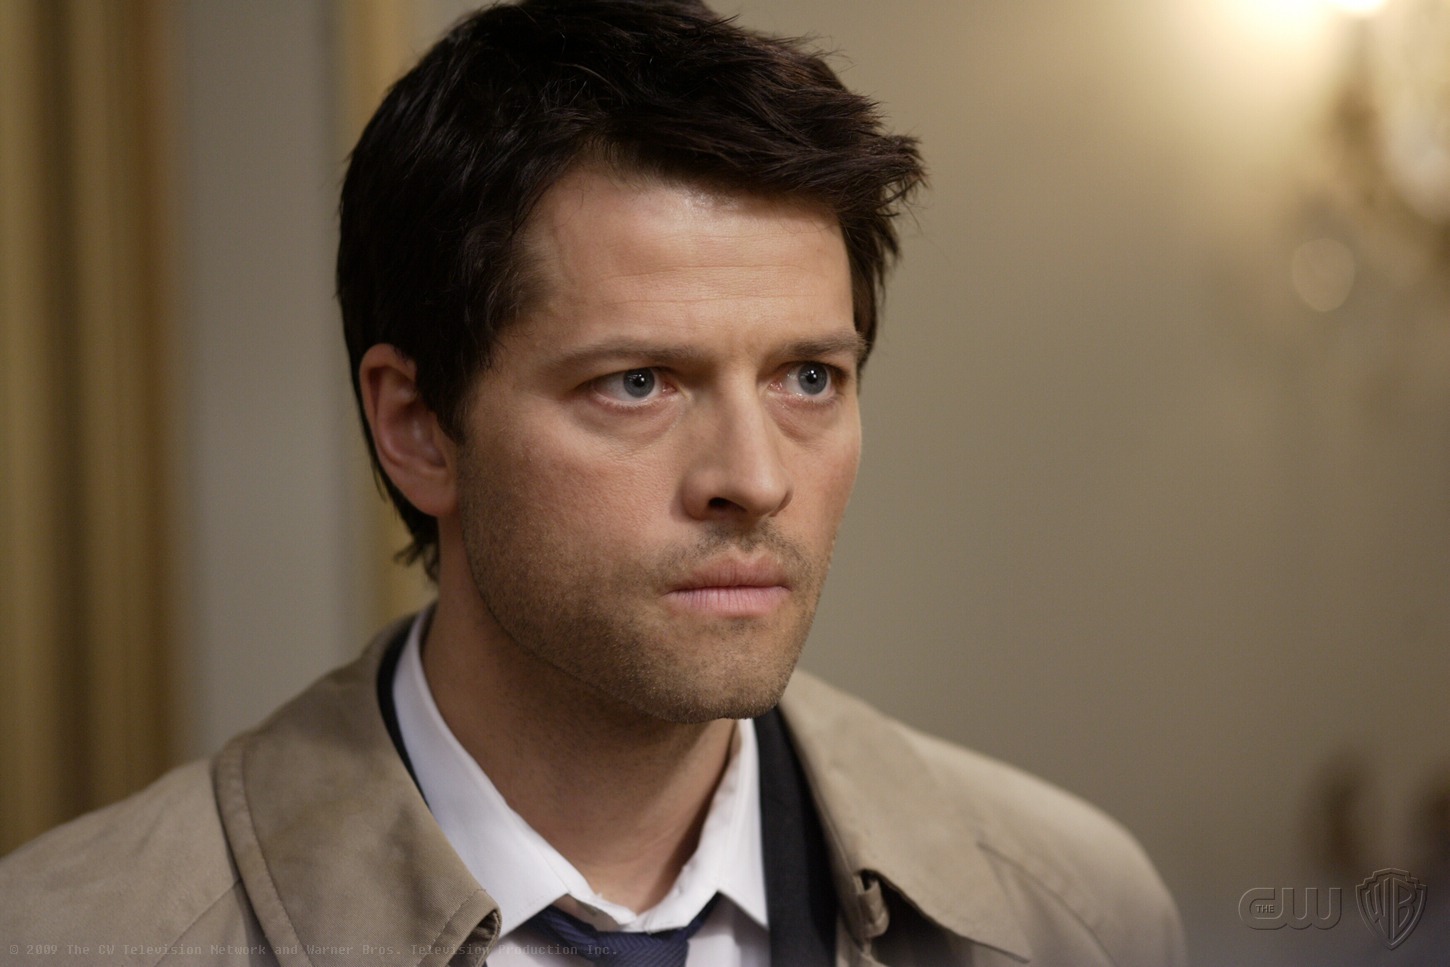 Castiel: You are not alone in this